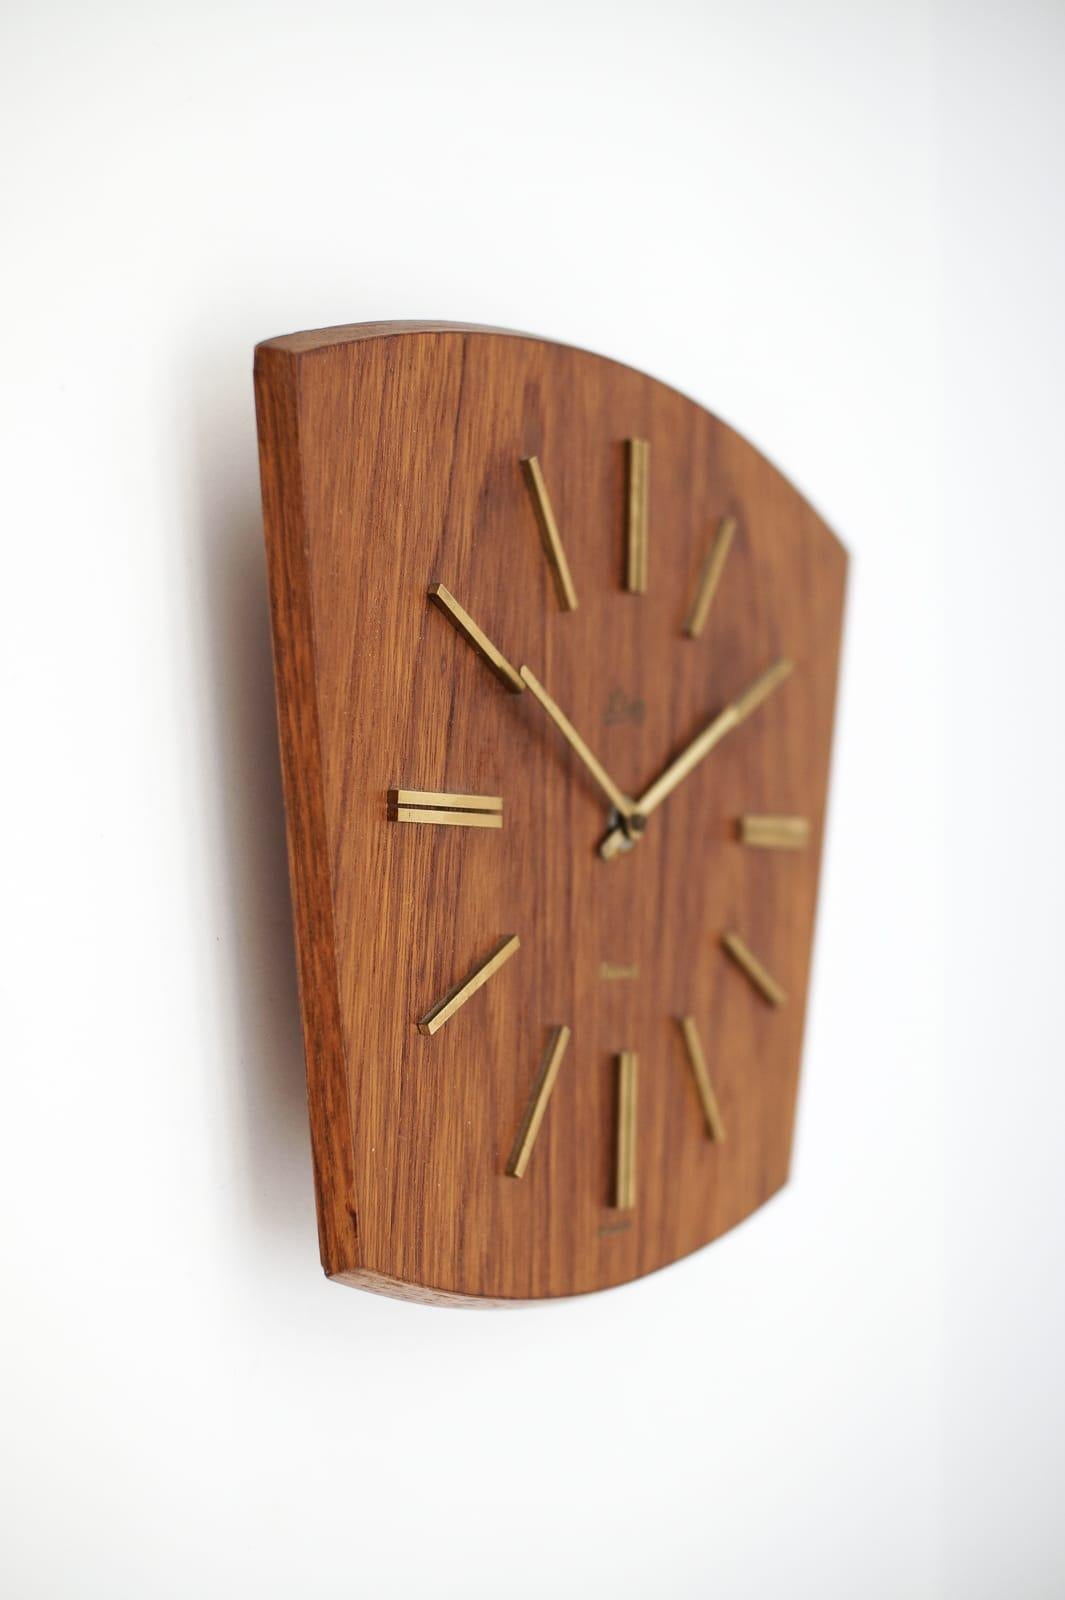 Stunning wall clock made of teak and brass. 

One of the most beautiful models I have seen to date.

An eye catcher par excellence.

Made in Germany.

Electric, battery operated clock.